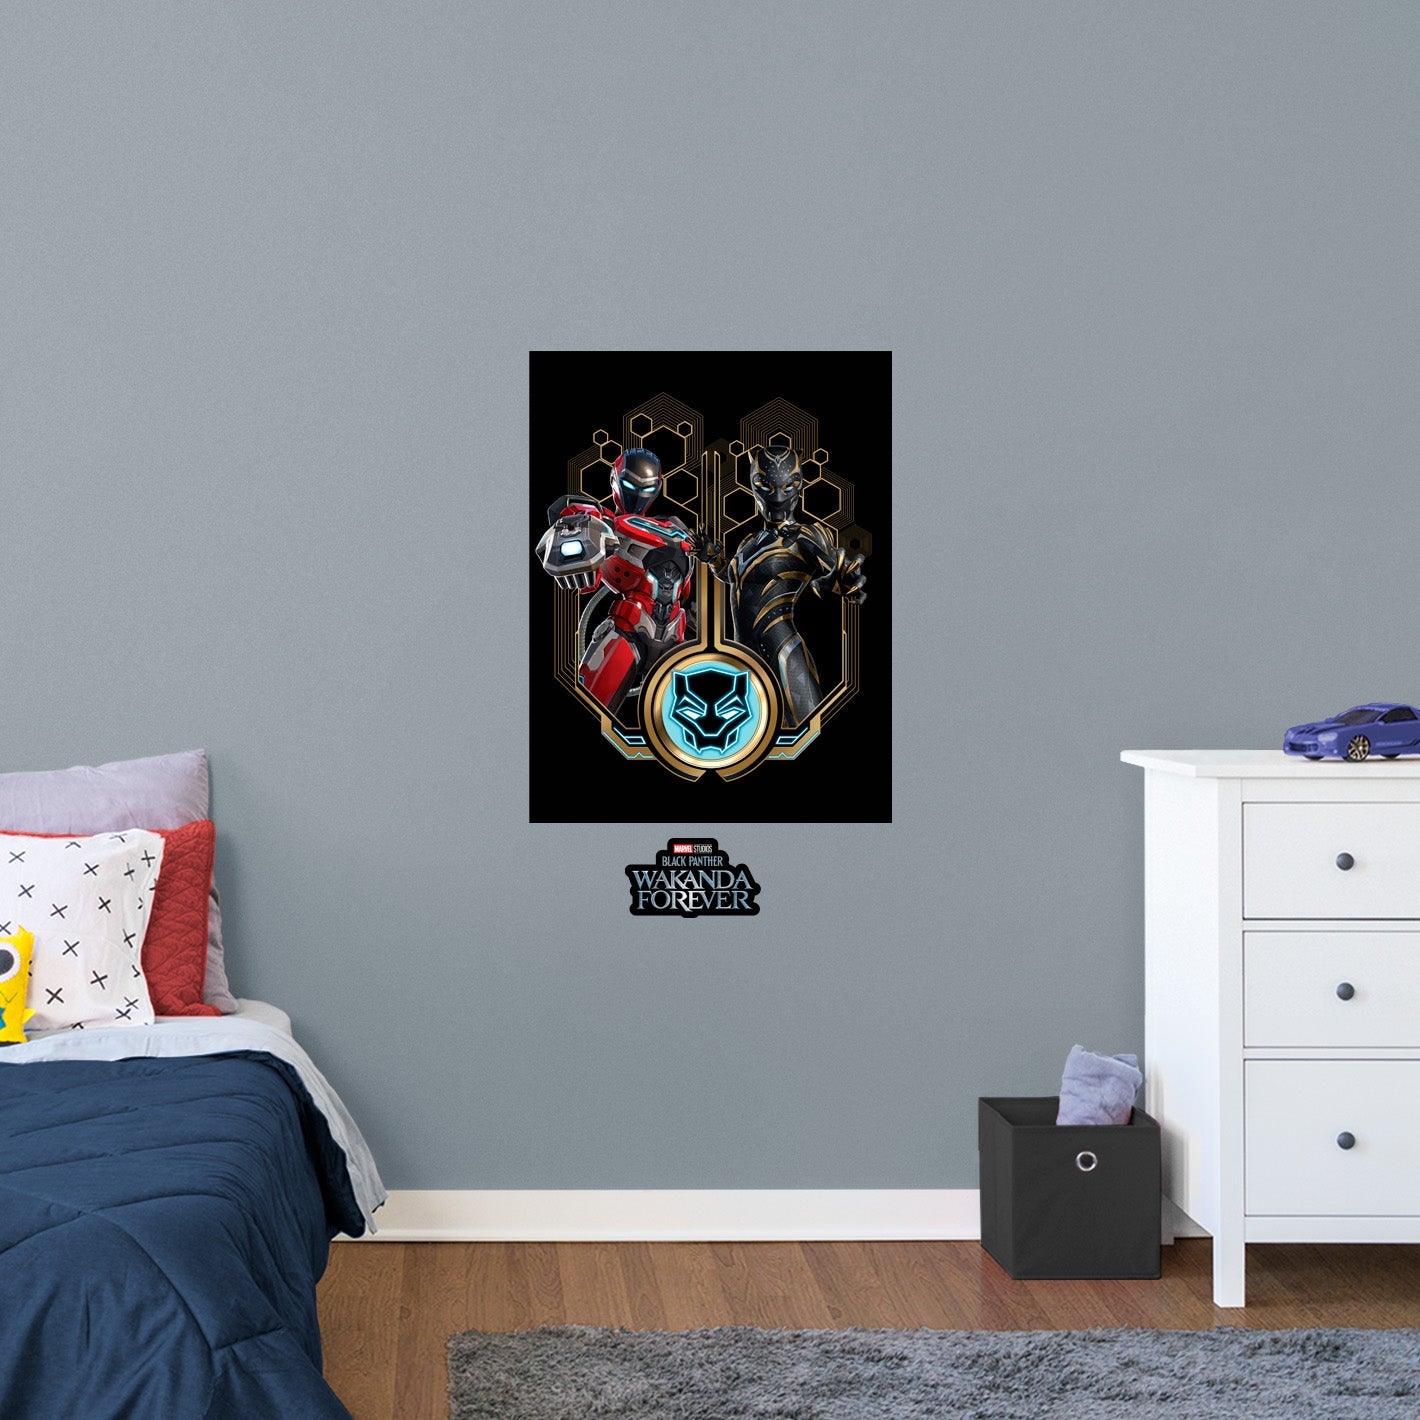 Black Panther Wakanda Forever: Black Panther & Ironheart Poster - Officially Licensed Marvel Removable Adhesive Decal